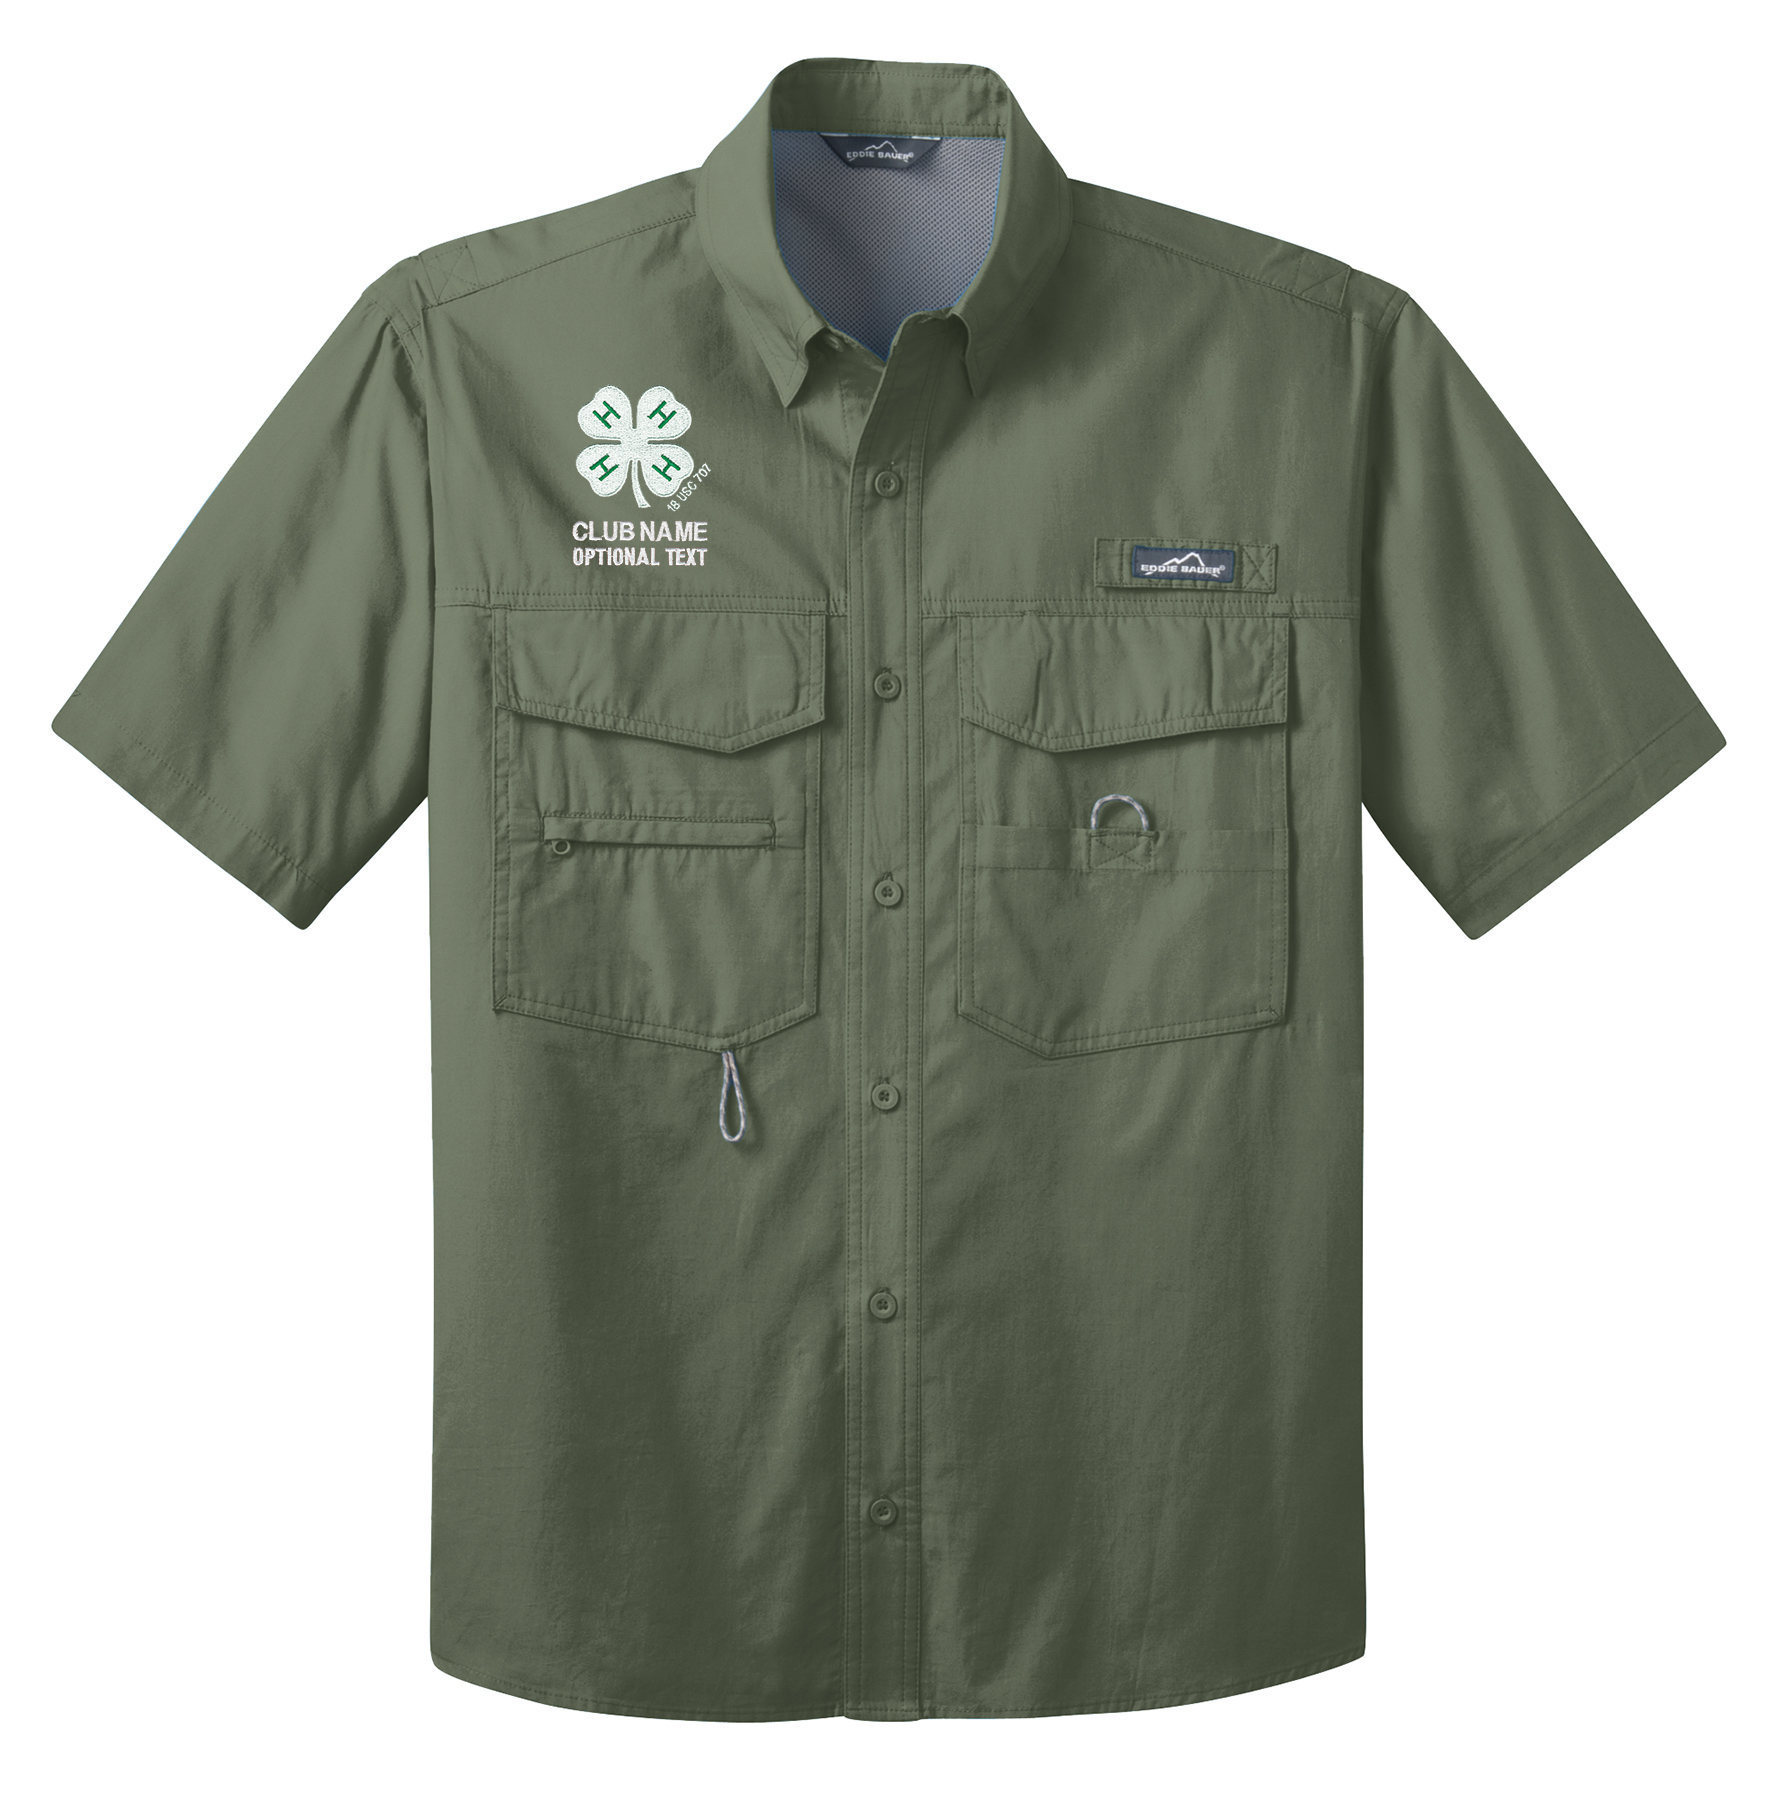 Eddie Bauer – Short Sleeve Fishing Shirt with Embroidered 4-H Logo - White, 2x Large